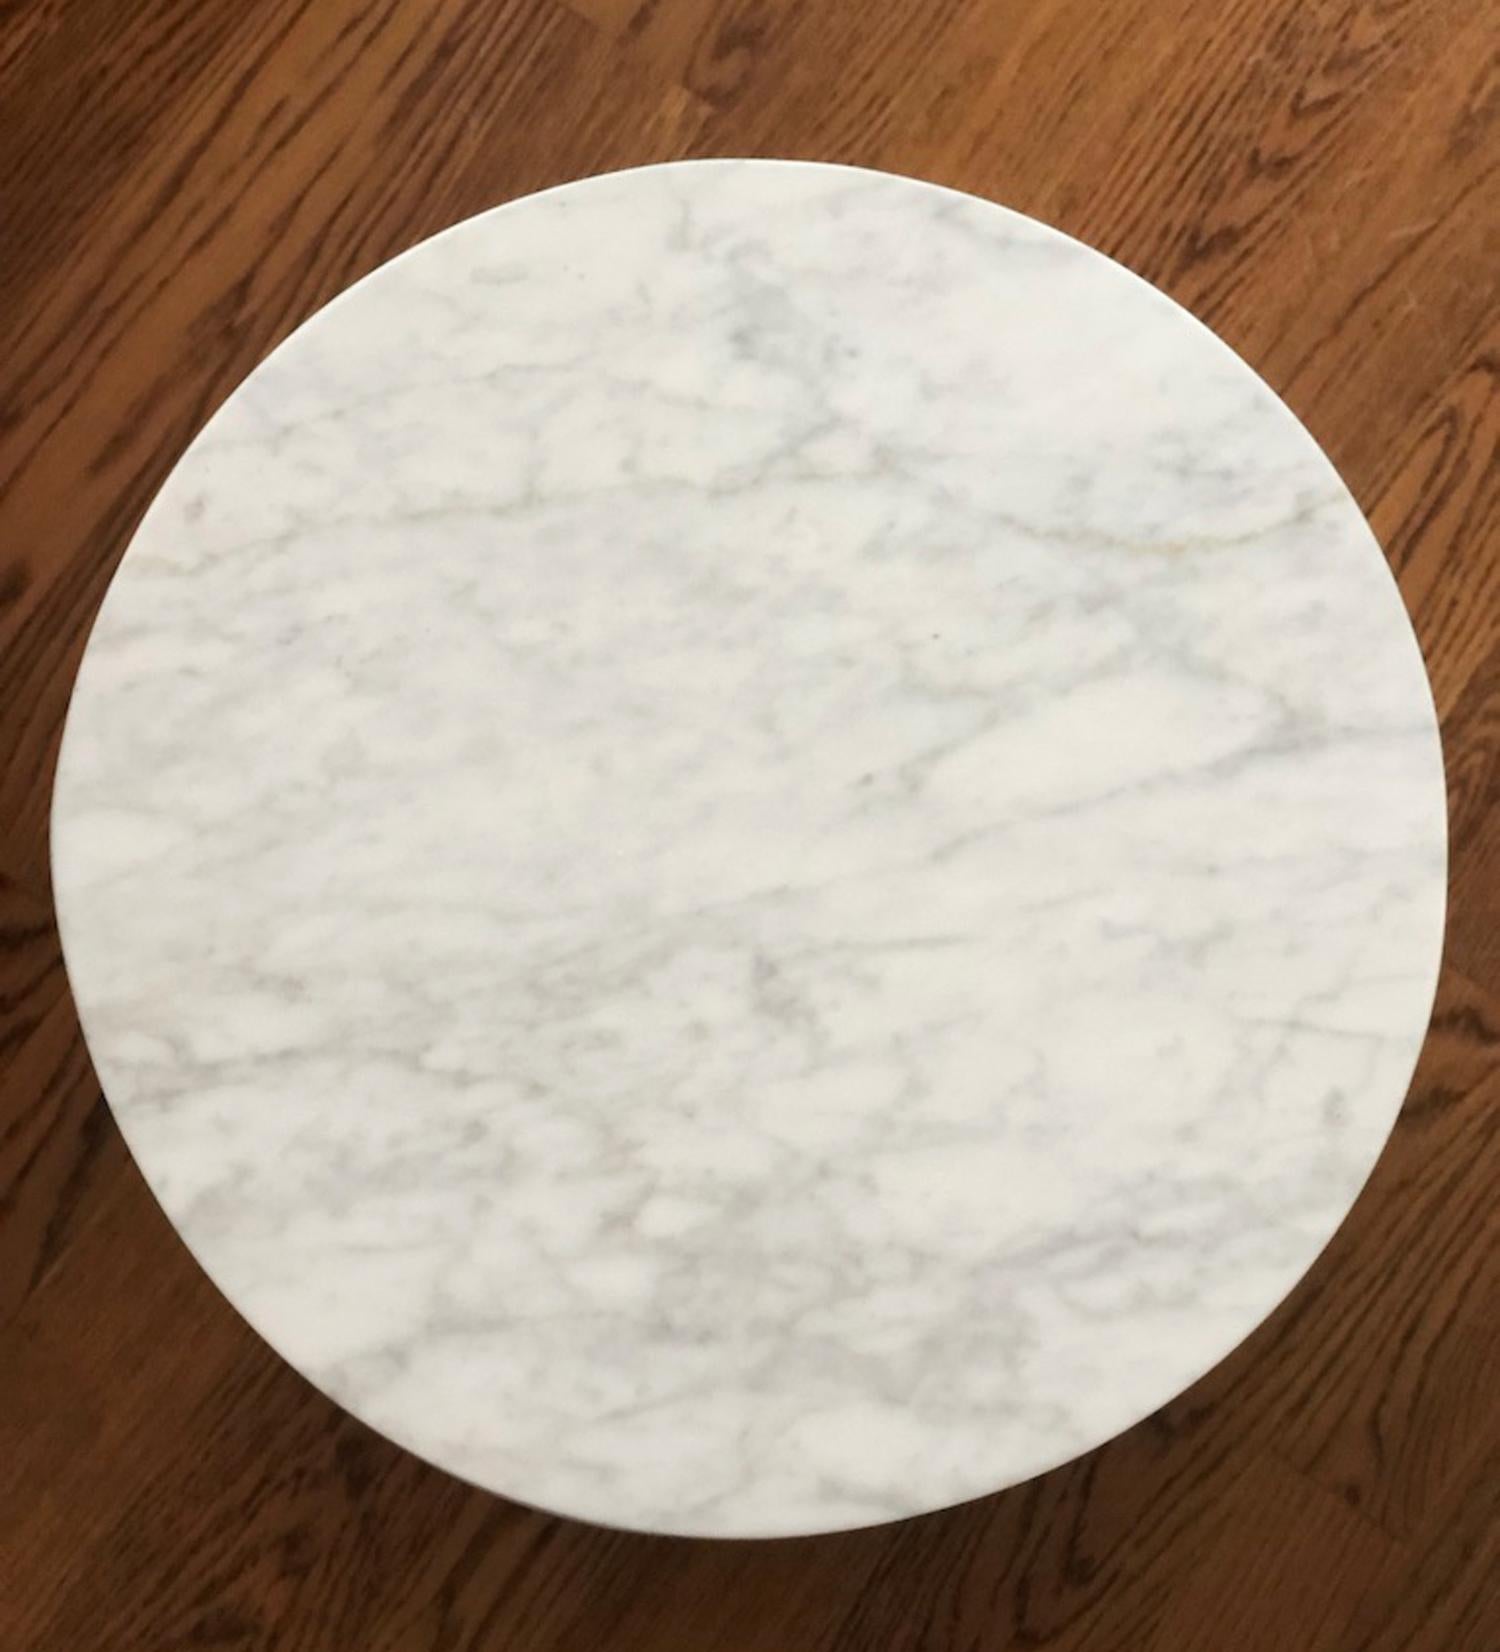 Handcrafted from slabs of marble on a sturdy wooden frame
Thick, overhanging top is set on a low, inset base to create a floating effect
Hidden casters allow ease of placement. Casters are not removable and do not lock.
Variations in the natural